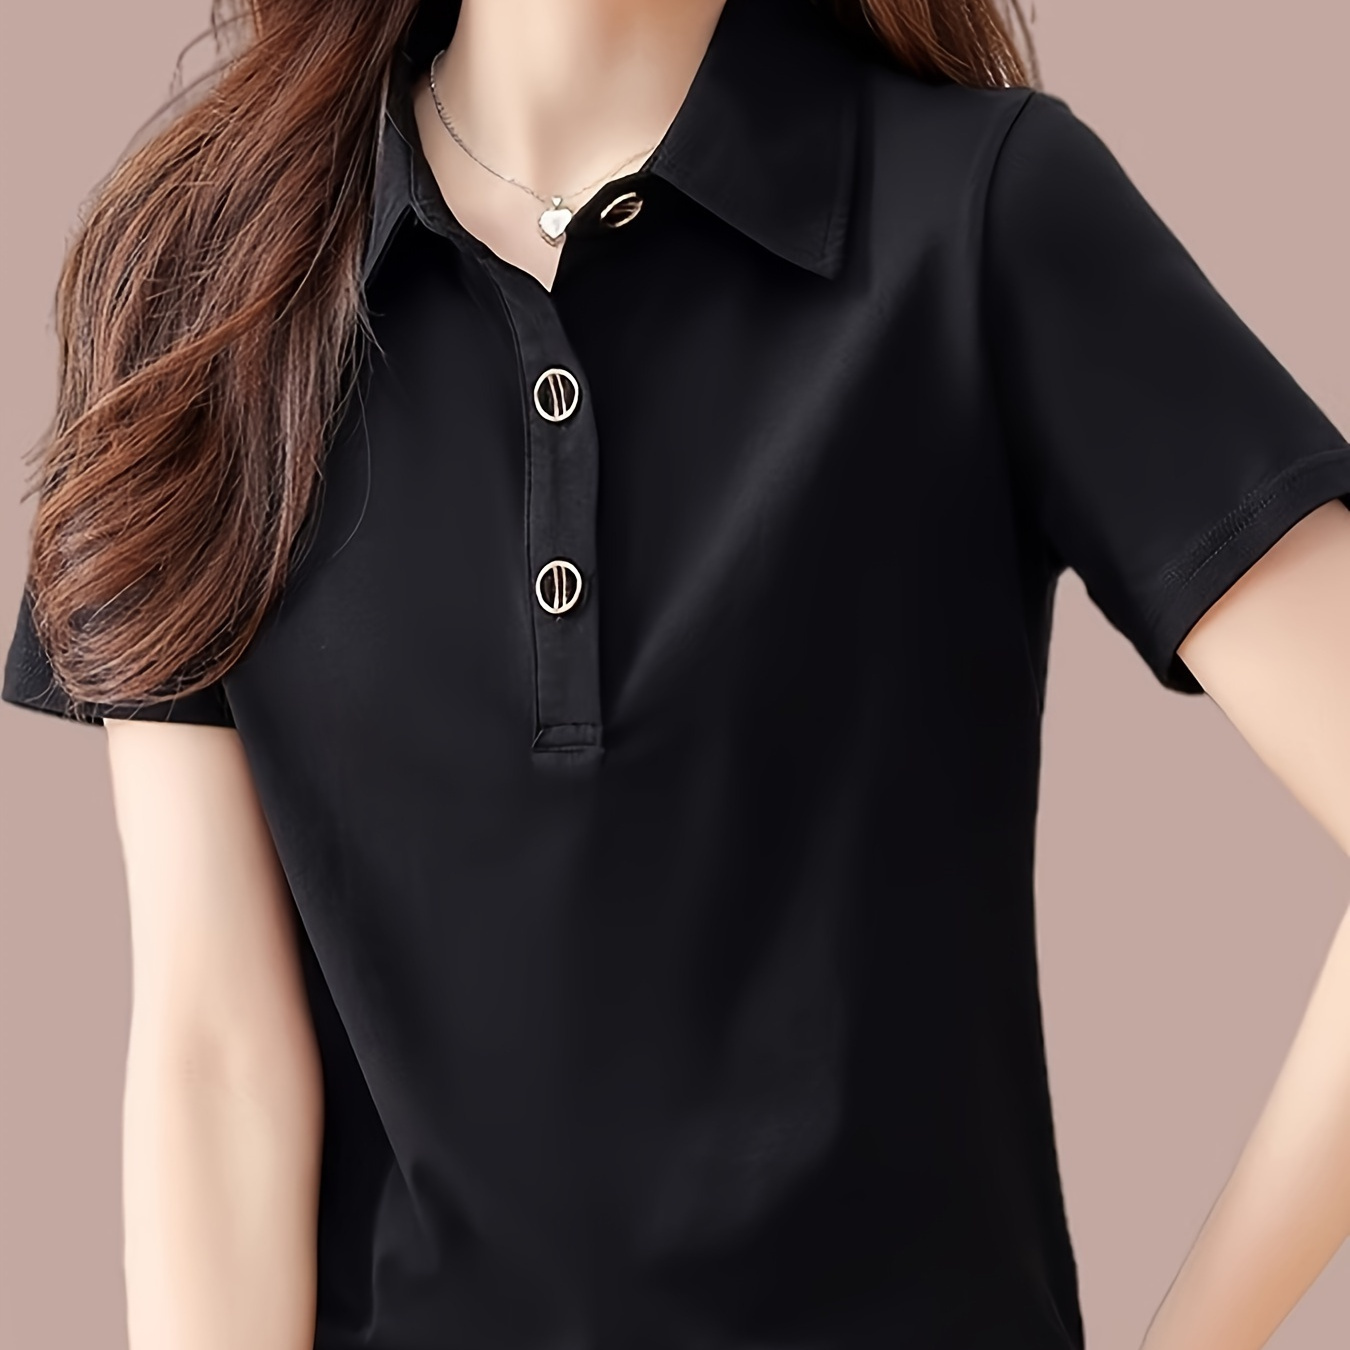 

Solid Color Collared T-shirt, Casual Short Sleeve Top For Spring & Summer, Women's Clothing